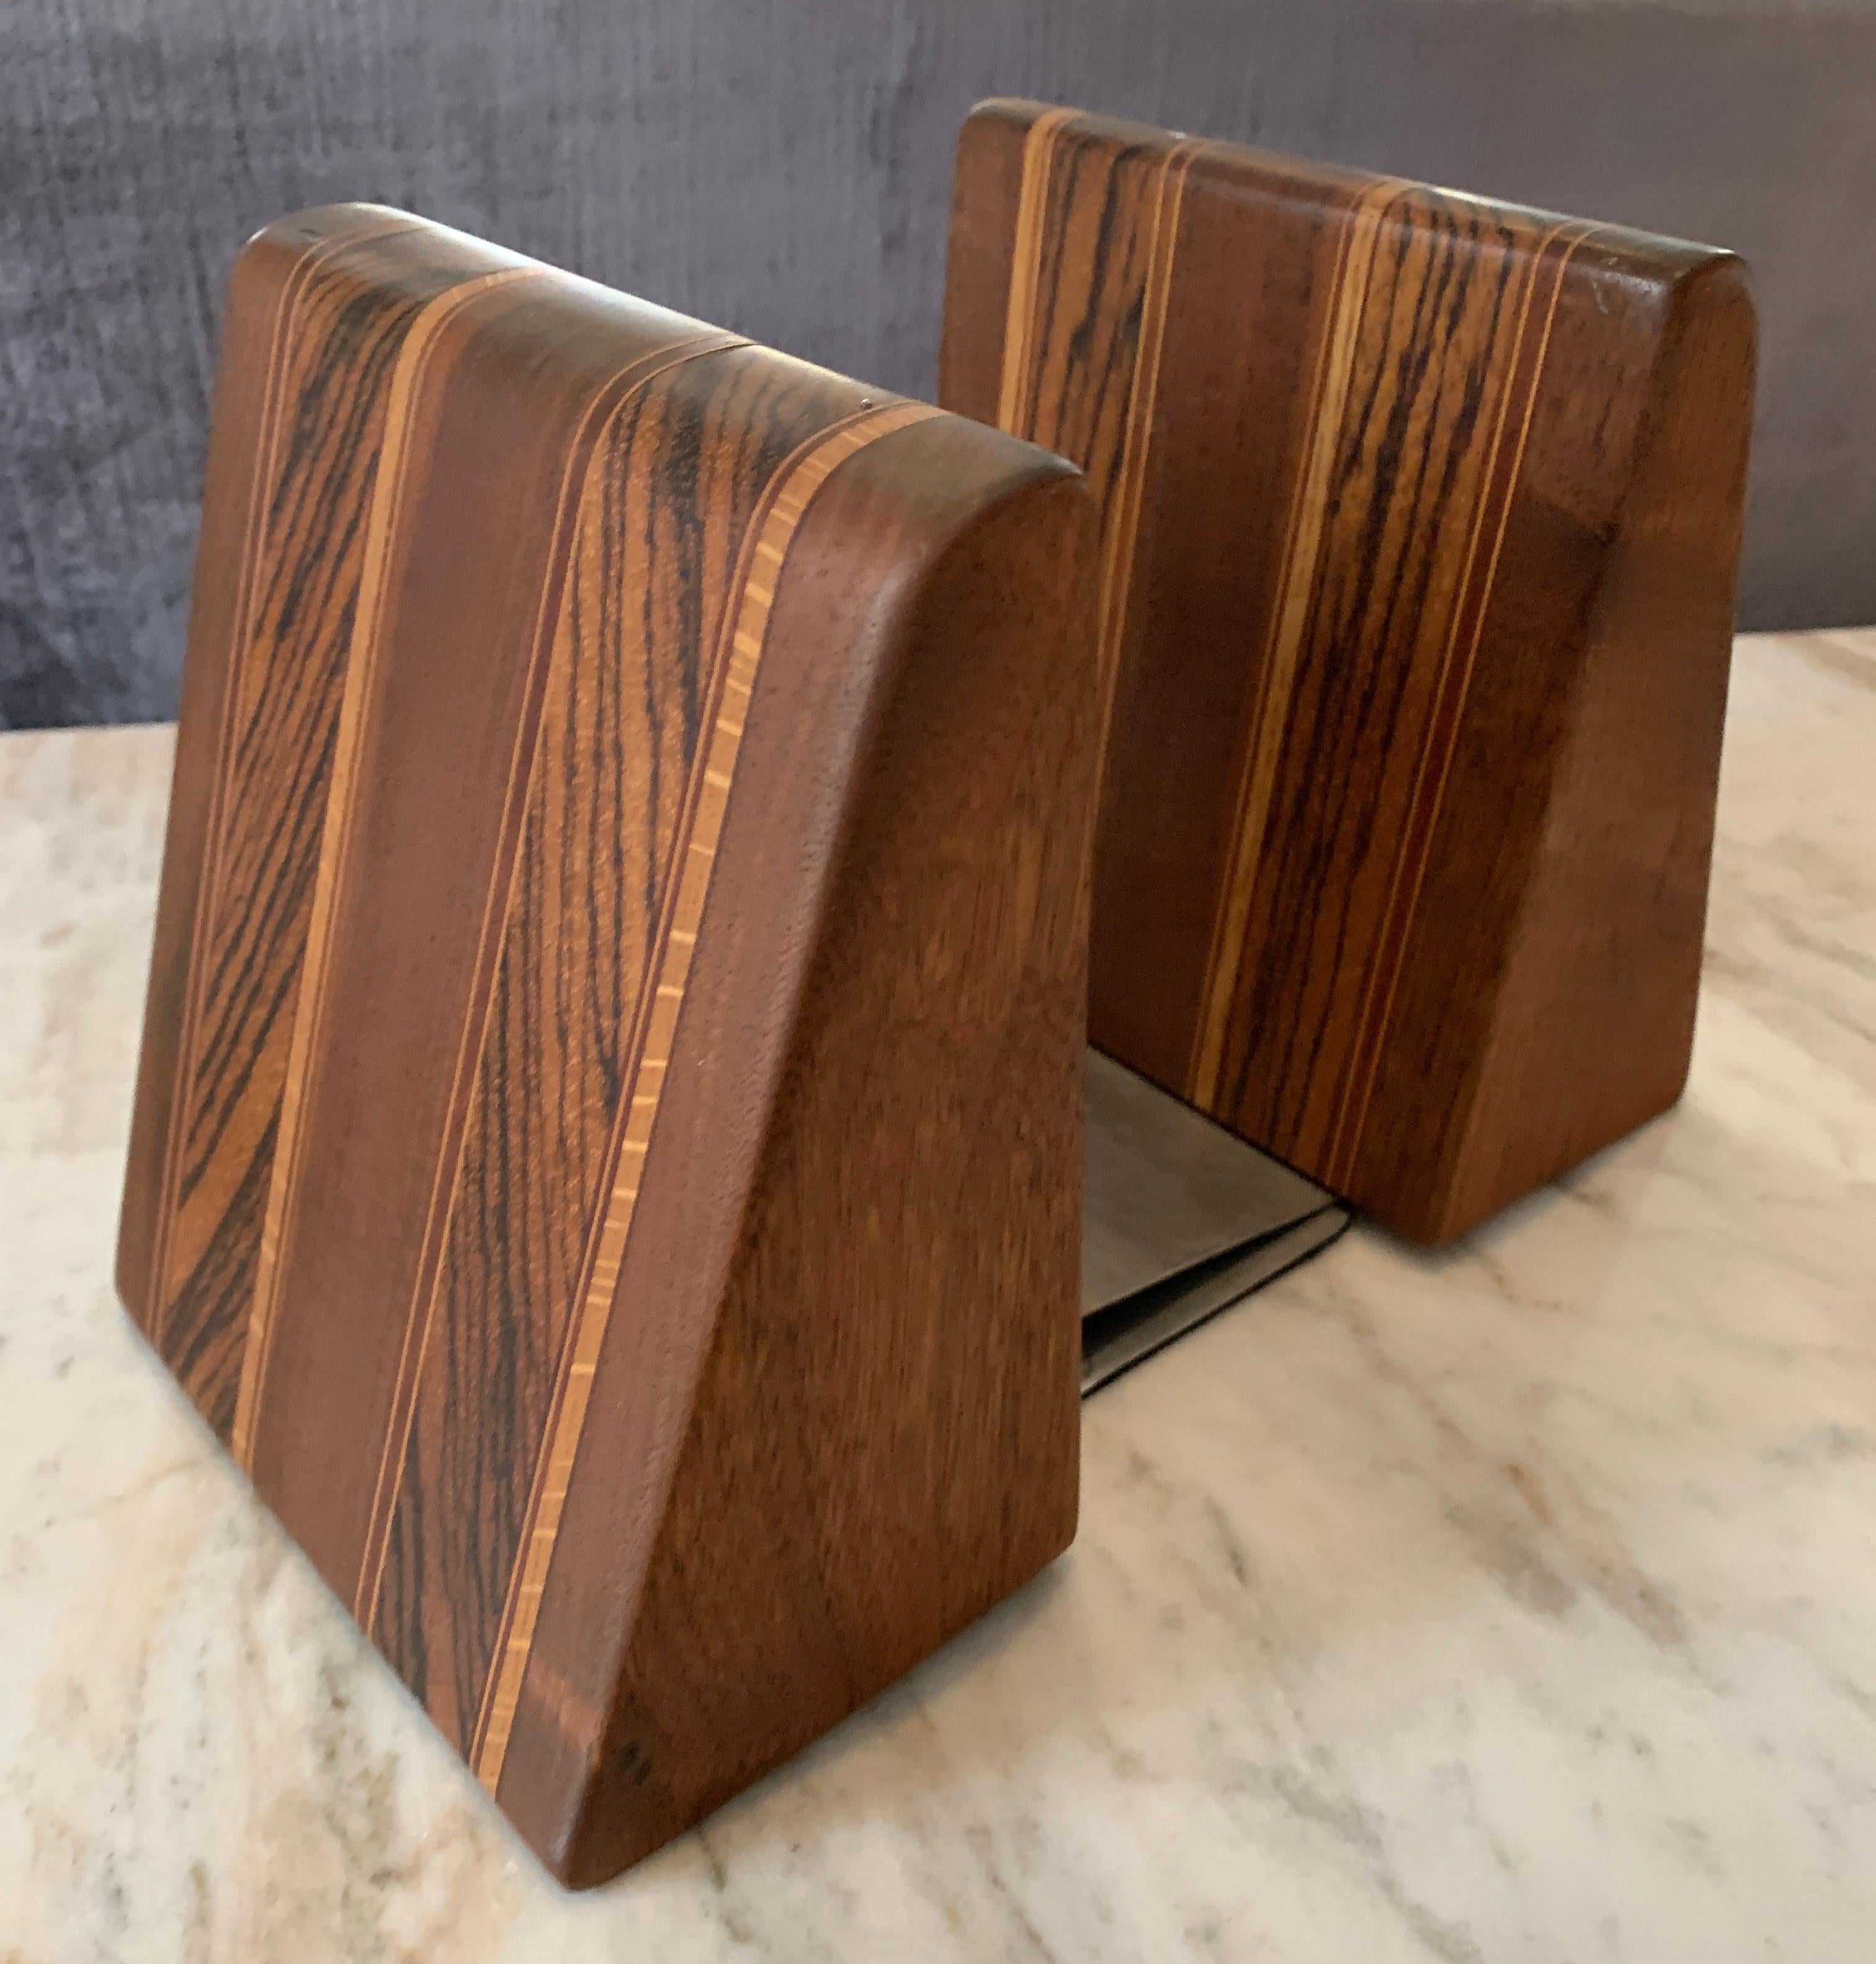 Angular inlay patterned wooden bookends with metal slide - a wonderful pair, in the Manner of Don Shoemaker - an array of patterns and solid pieces ready to show off the shelf or tabletop!